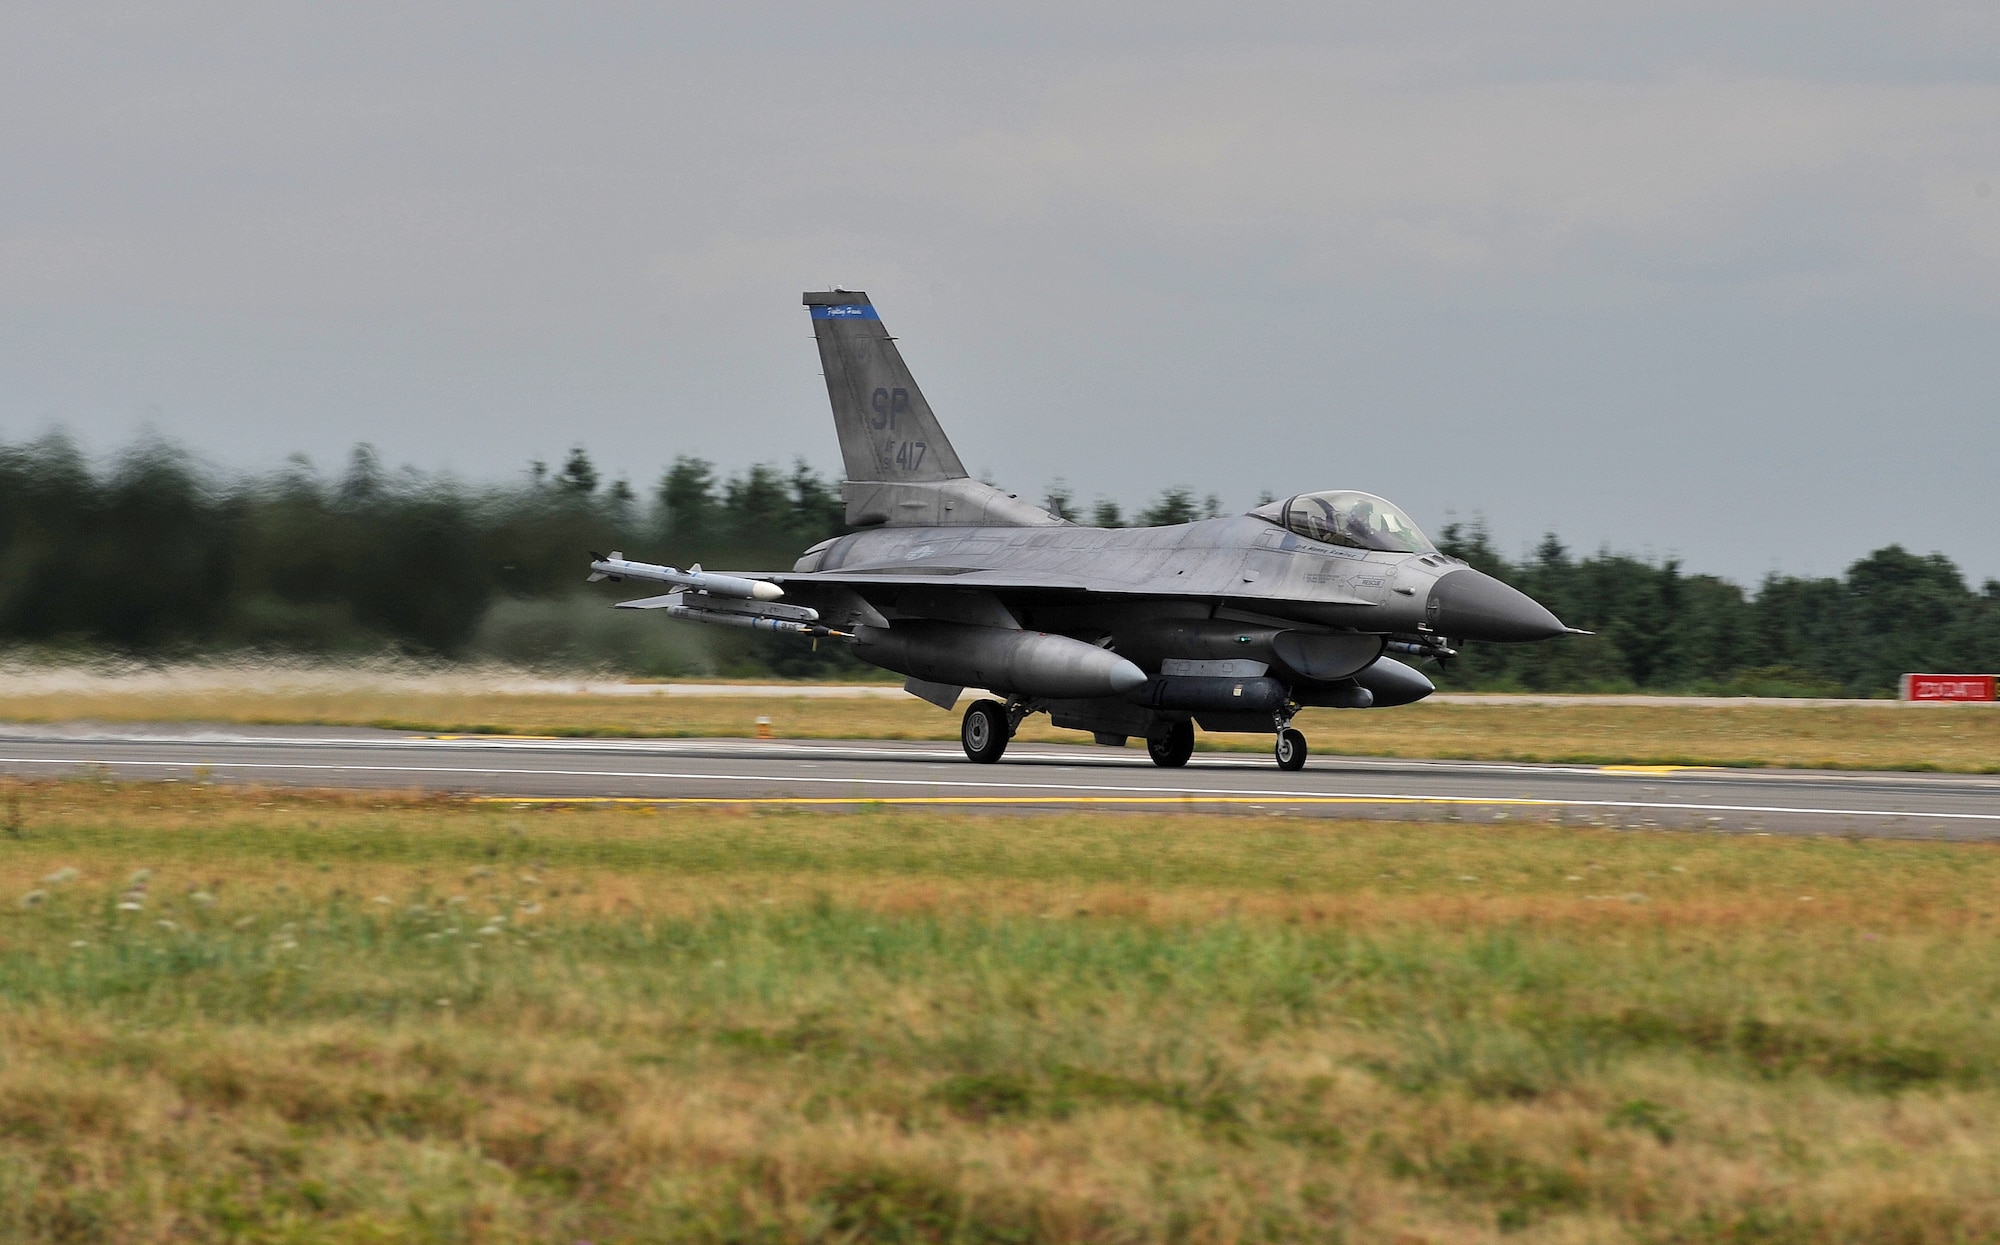 SPANGDAHLEM AIR BASE, Germany – Maj. Jason Attoway, 22nd Fighter Squadron director of operations, prepares to take off in an F-16 Fighting Falcon for an Allied Strike mission Aug. 4. Allied Strike is an annual close air support exercise, providing realistic training for US and NATO participants in all aspects of tactical air control and CAS. (U.S. Air Force photo/Senior Airman Nick Wilson)